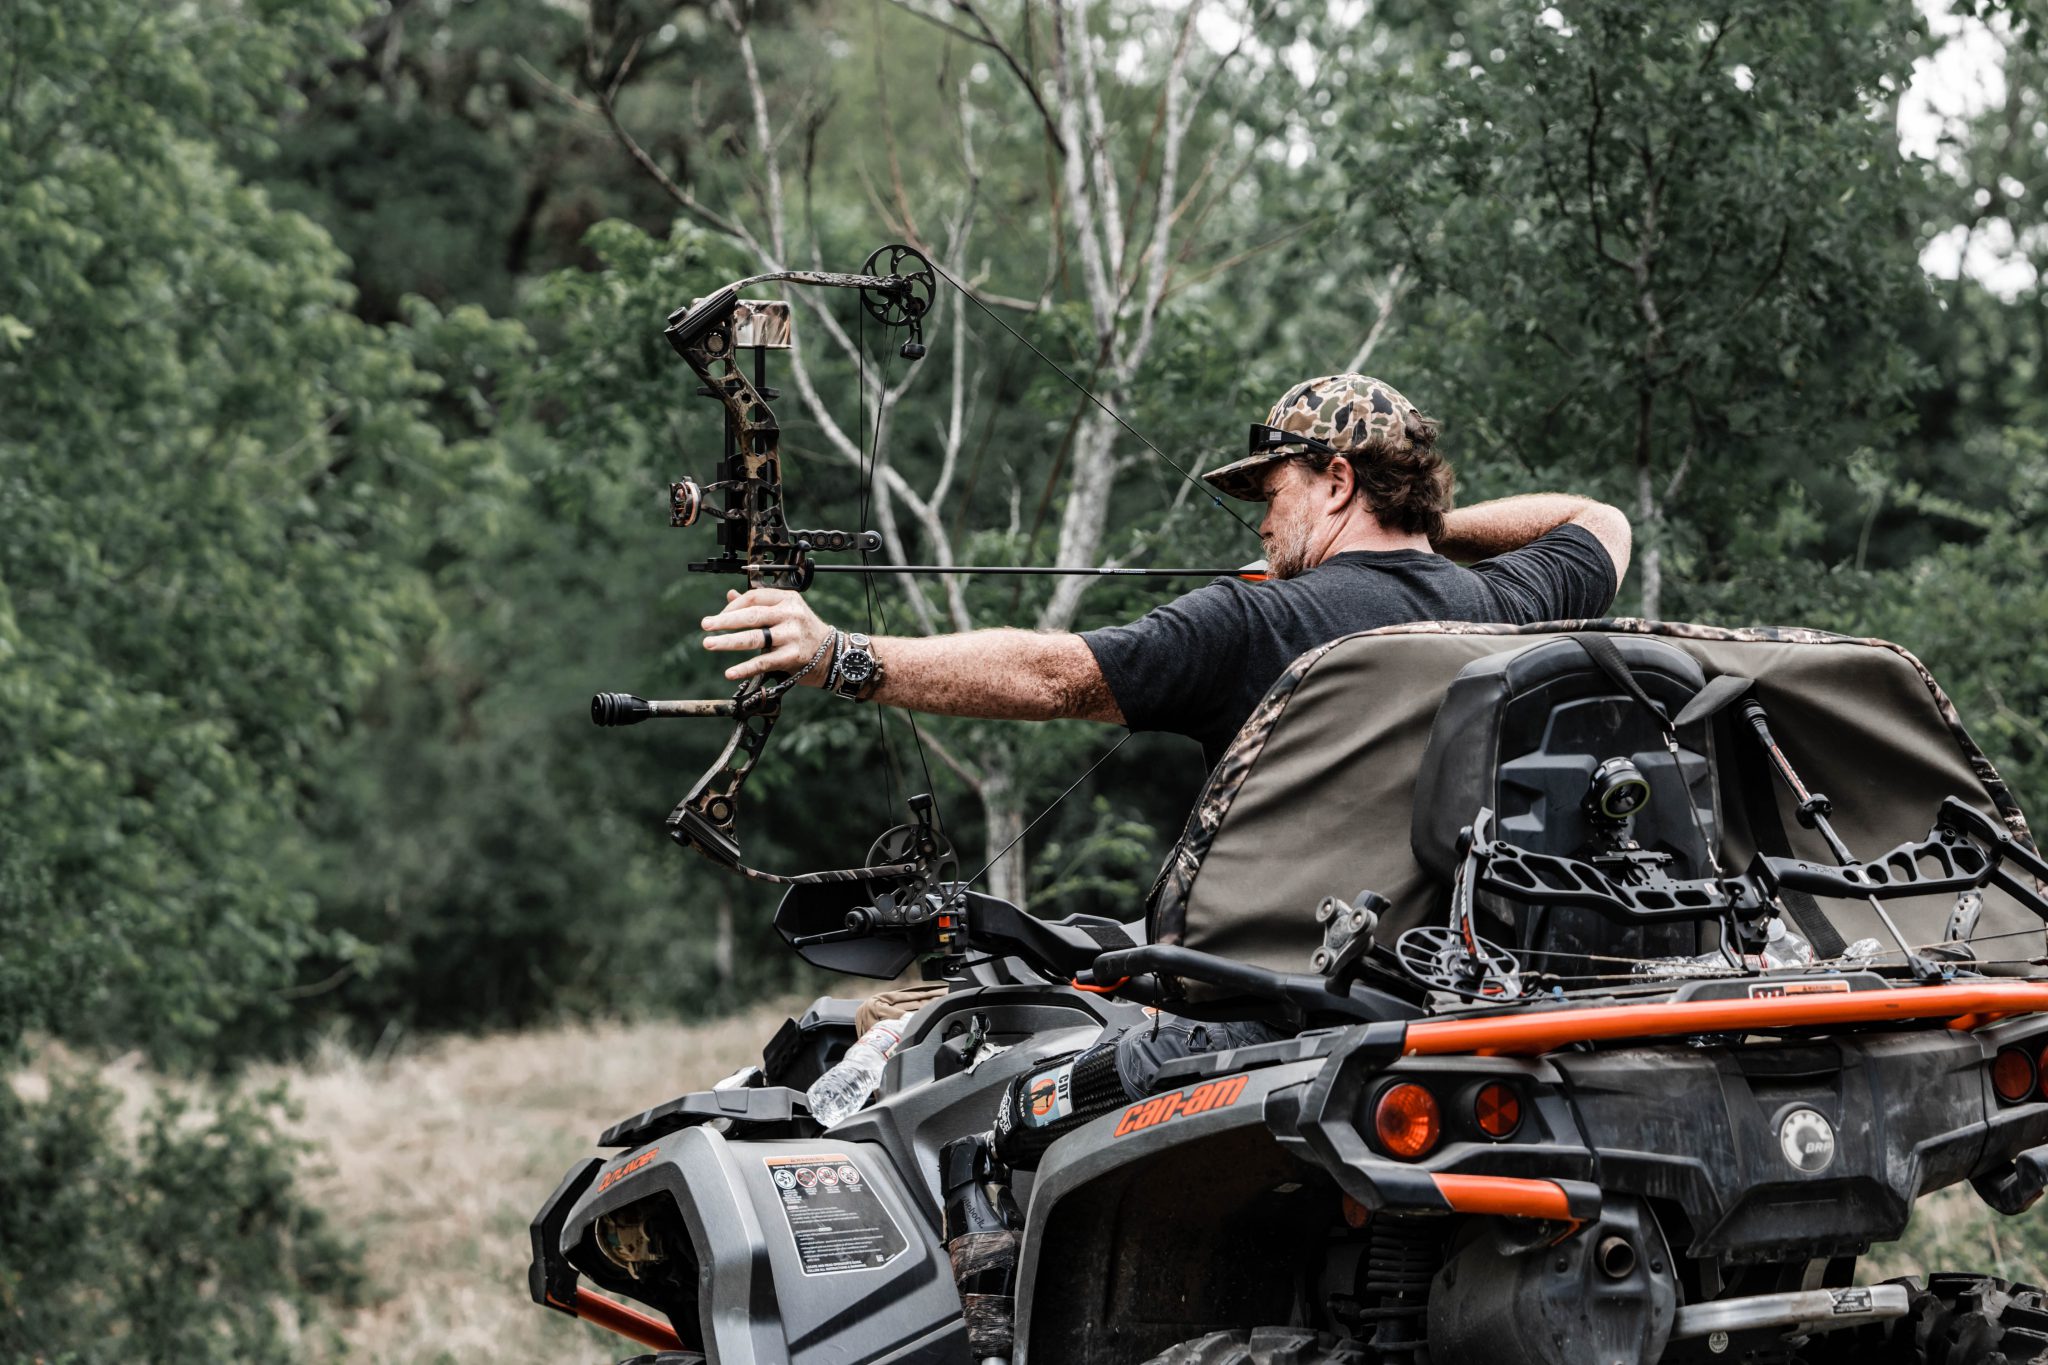 Clint Trial shooting a bow from his ATV